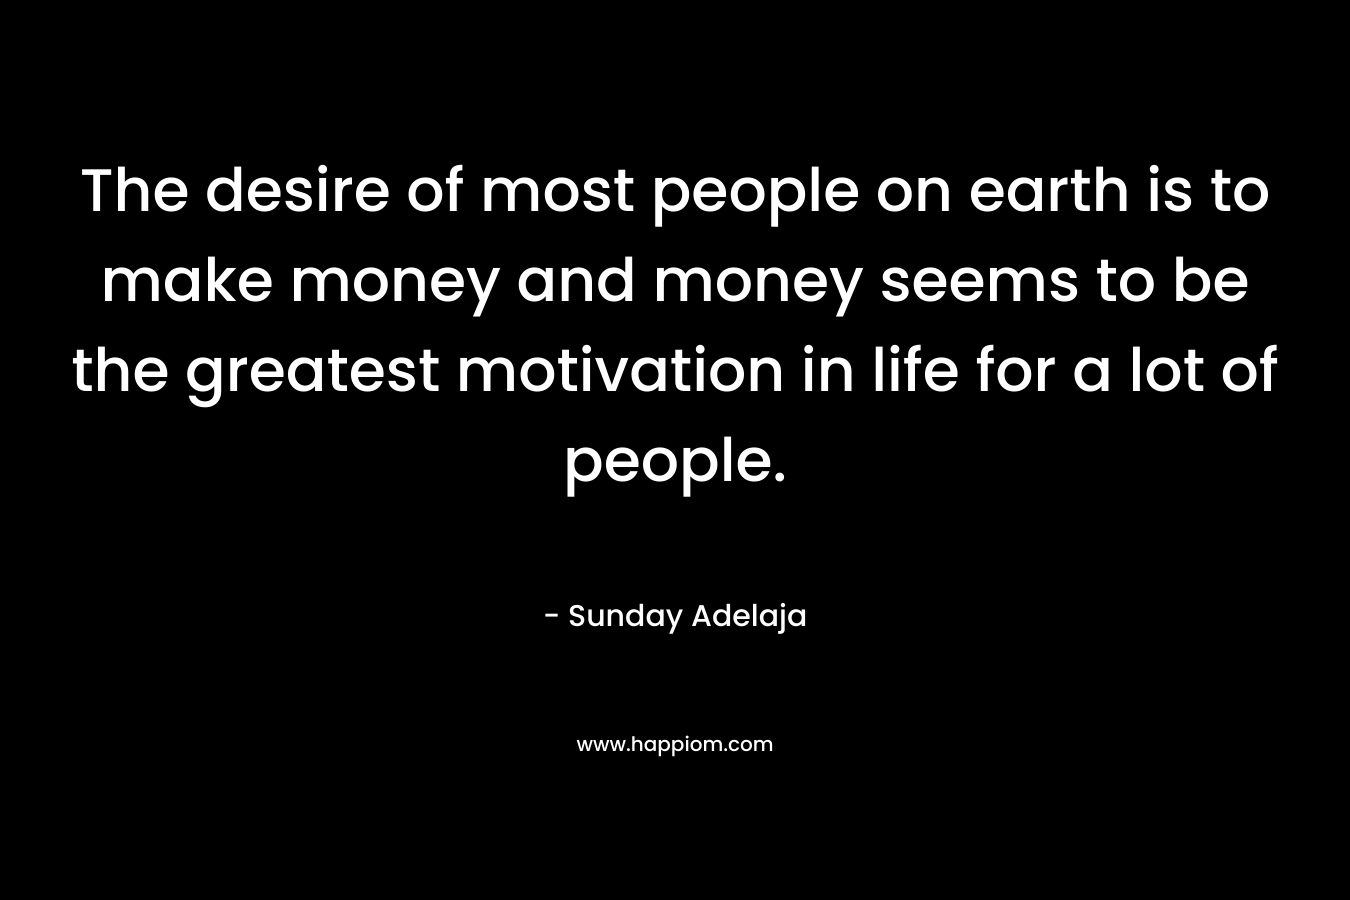 The desire of most people on earth is to make money and money seems to be the greatest motivation in life for a lot of people.